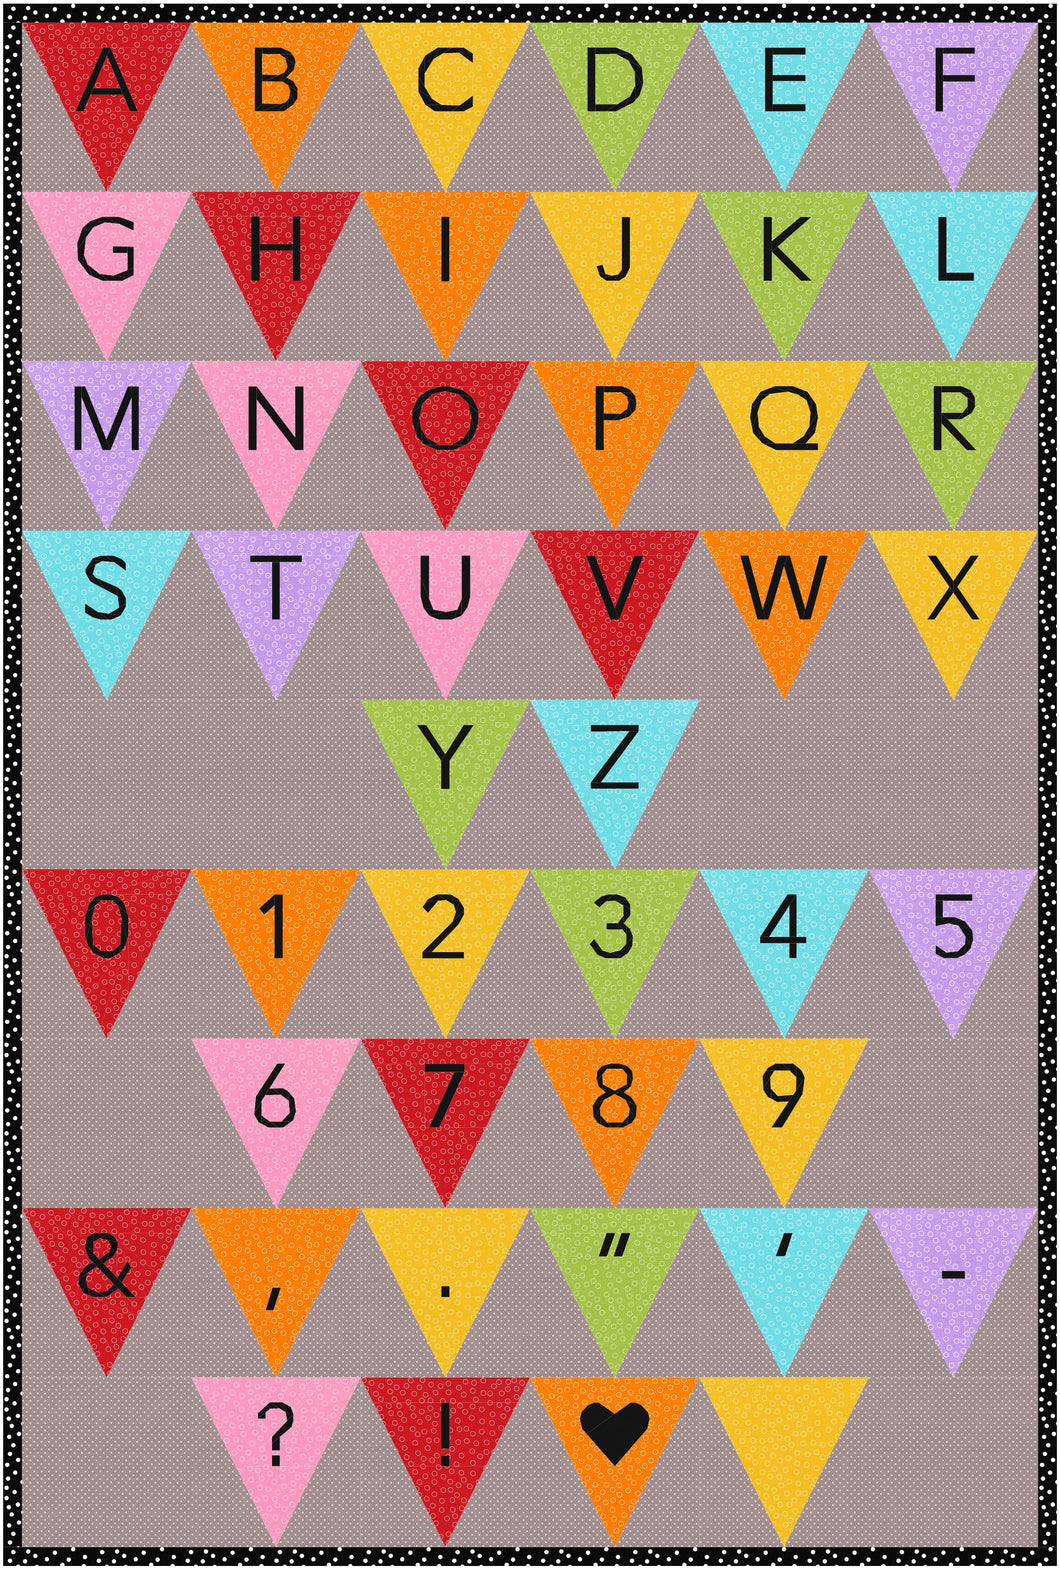 Party Banner Alphabet, Numbers and Punctuation, Foundation Paper Piecing Pattern (FPP), Quilt Block, 2 sizes